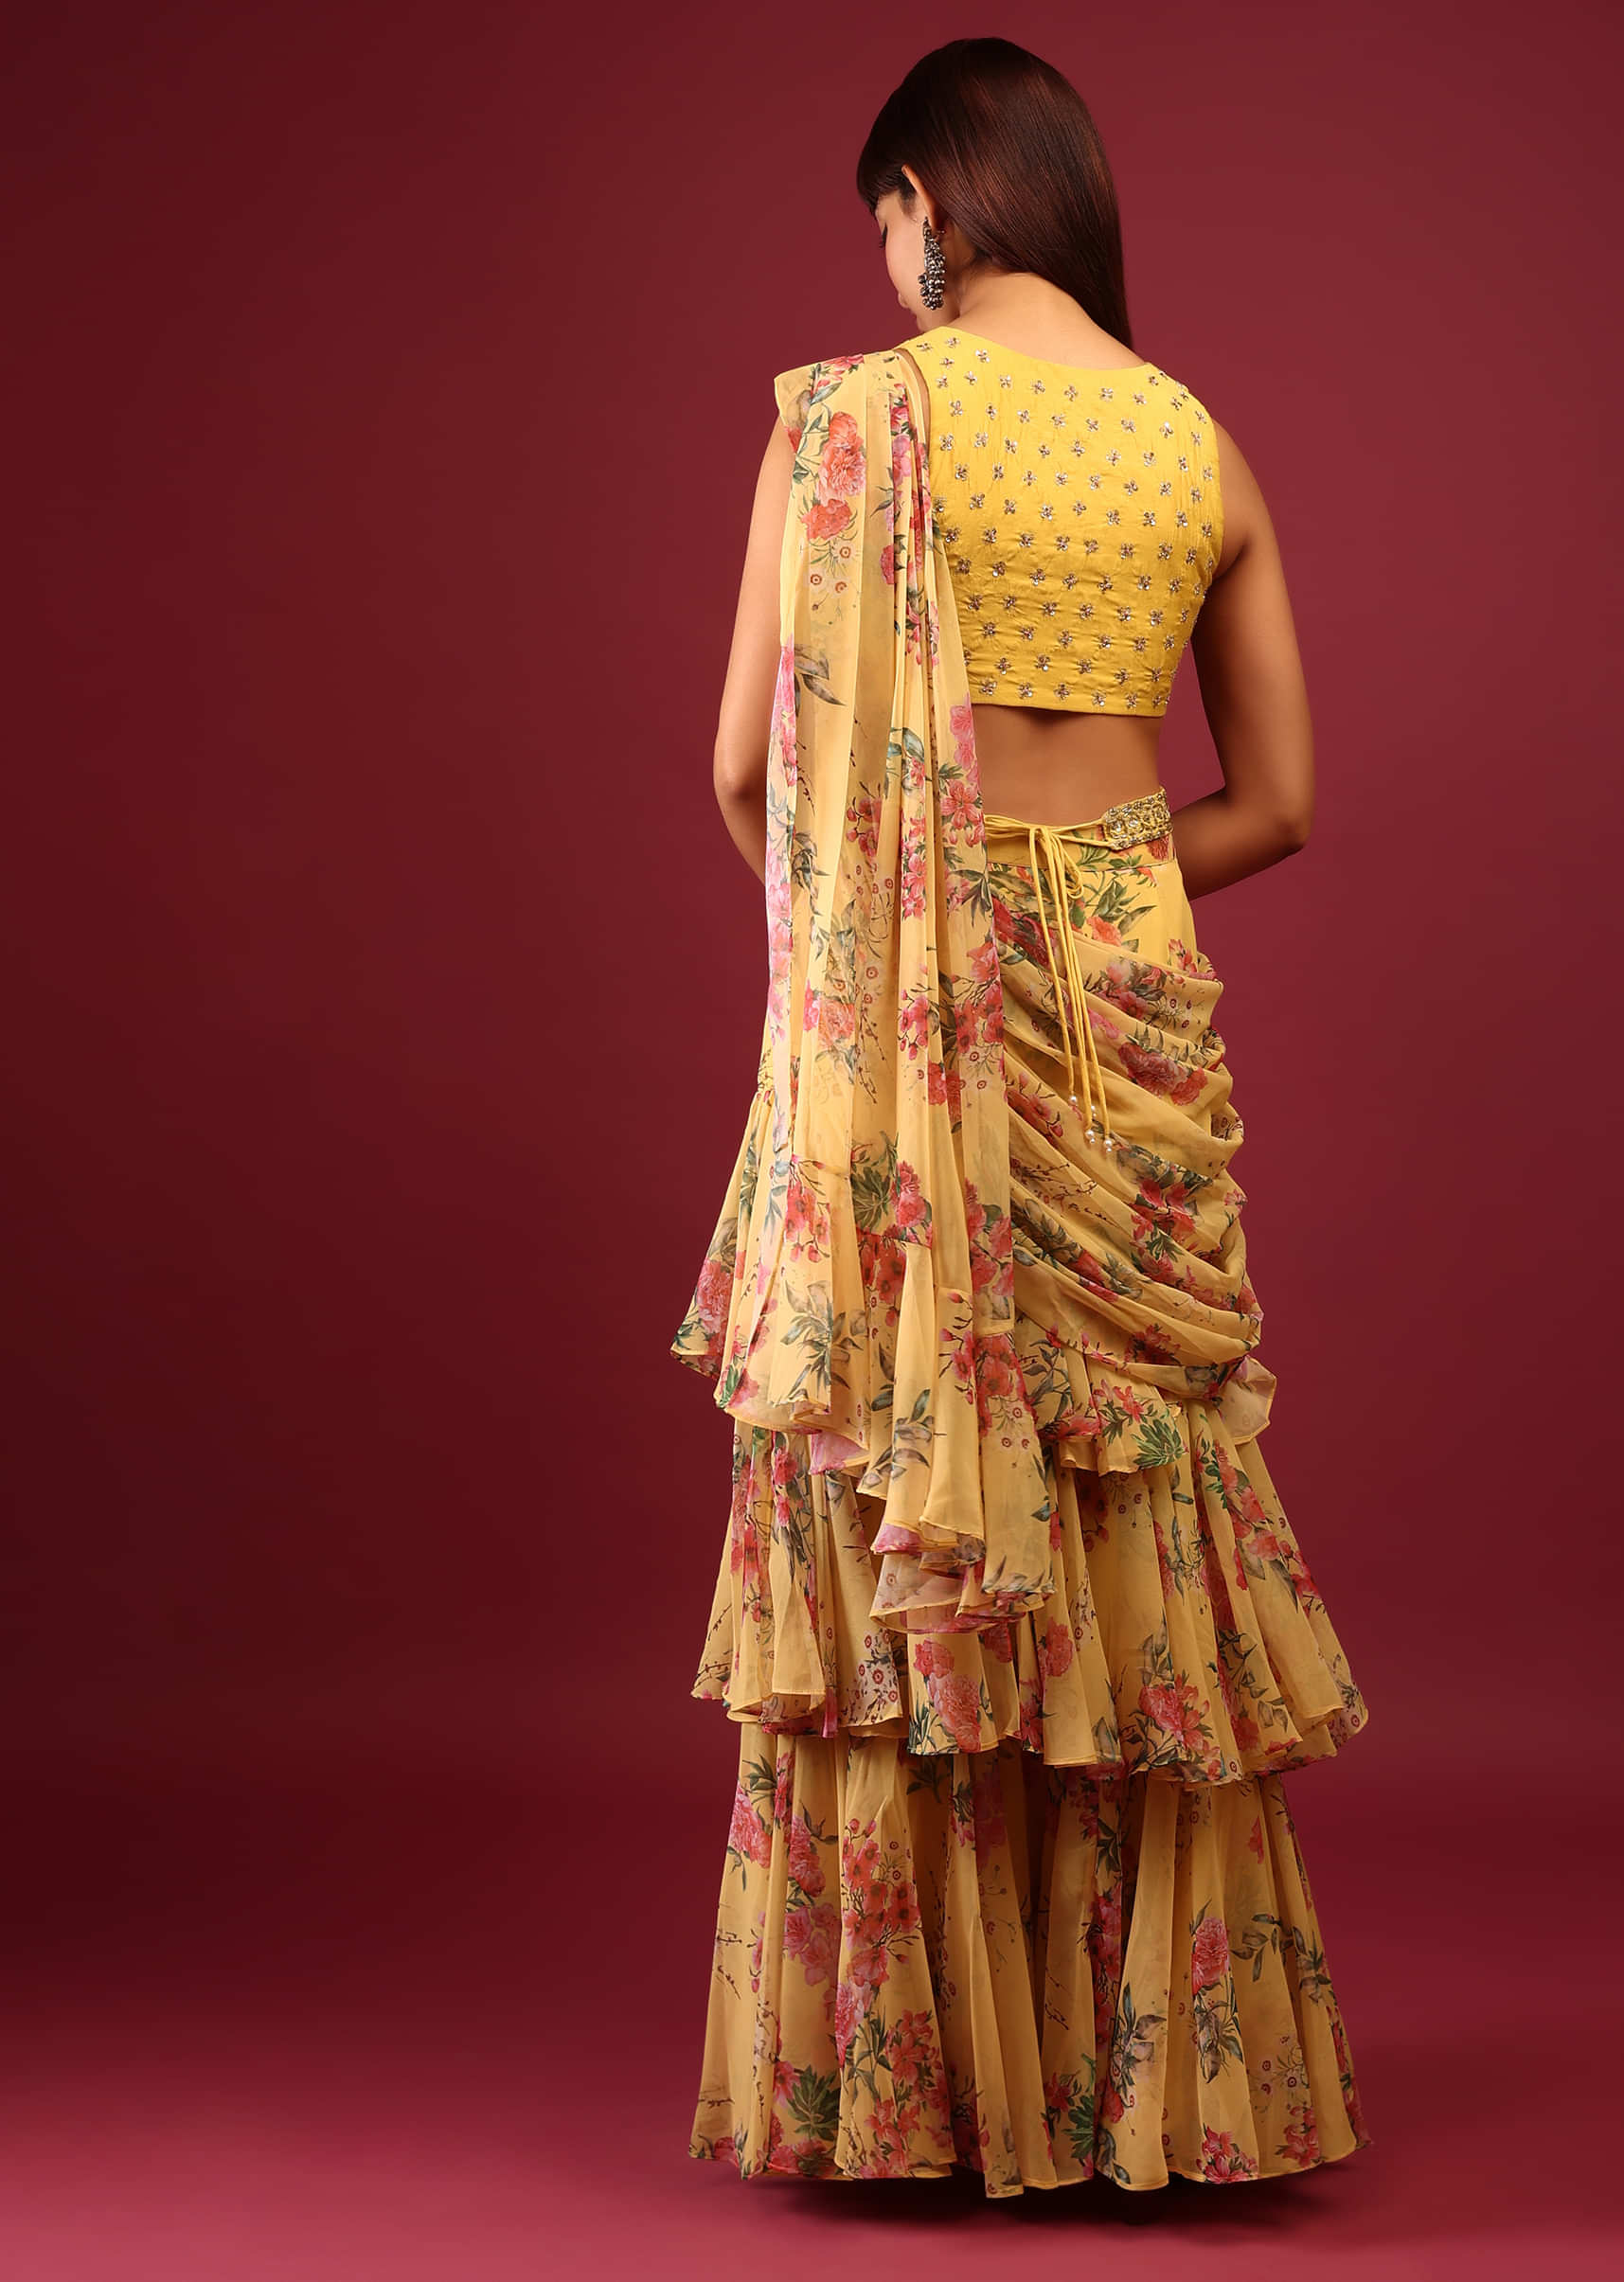 Mustard Yellow Floral Print Pleated Lehenga Saree In Layered Frill Pattern With An Embellished Blouse